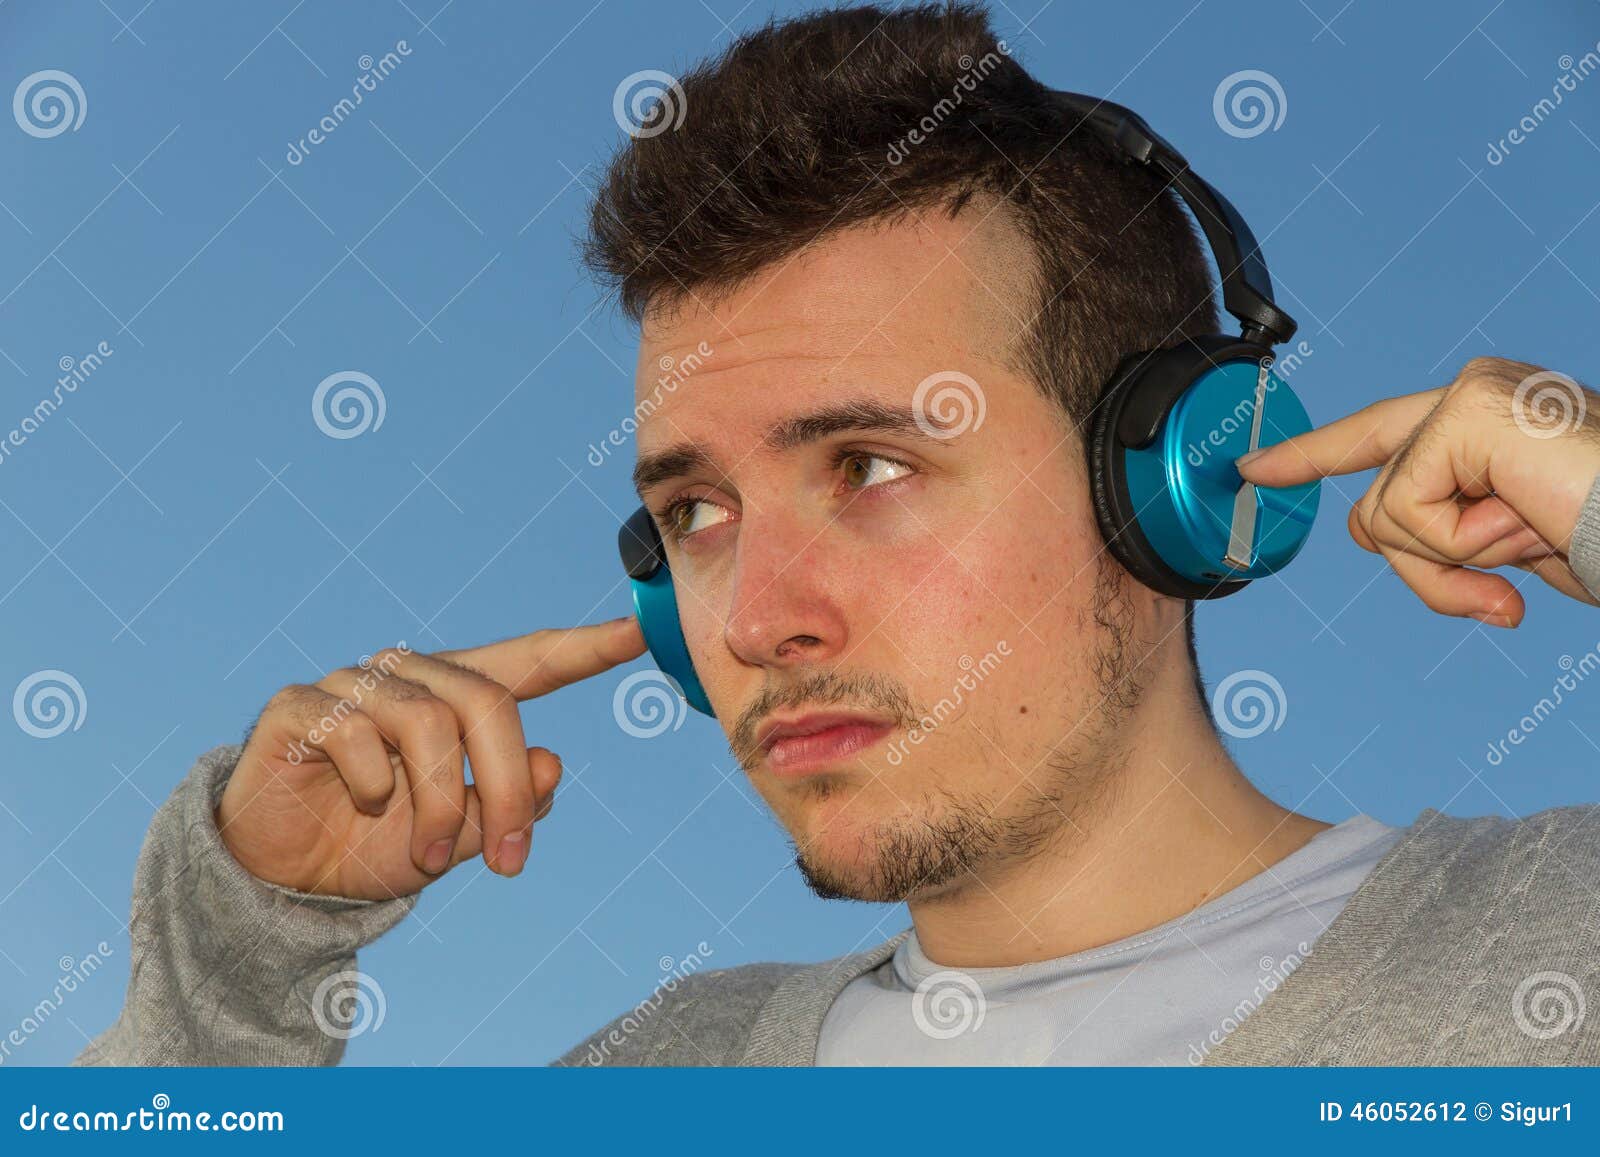 young man with headphones music